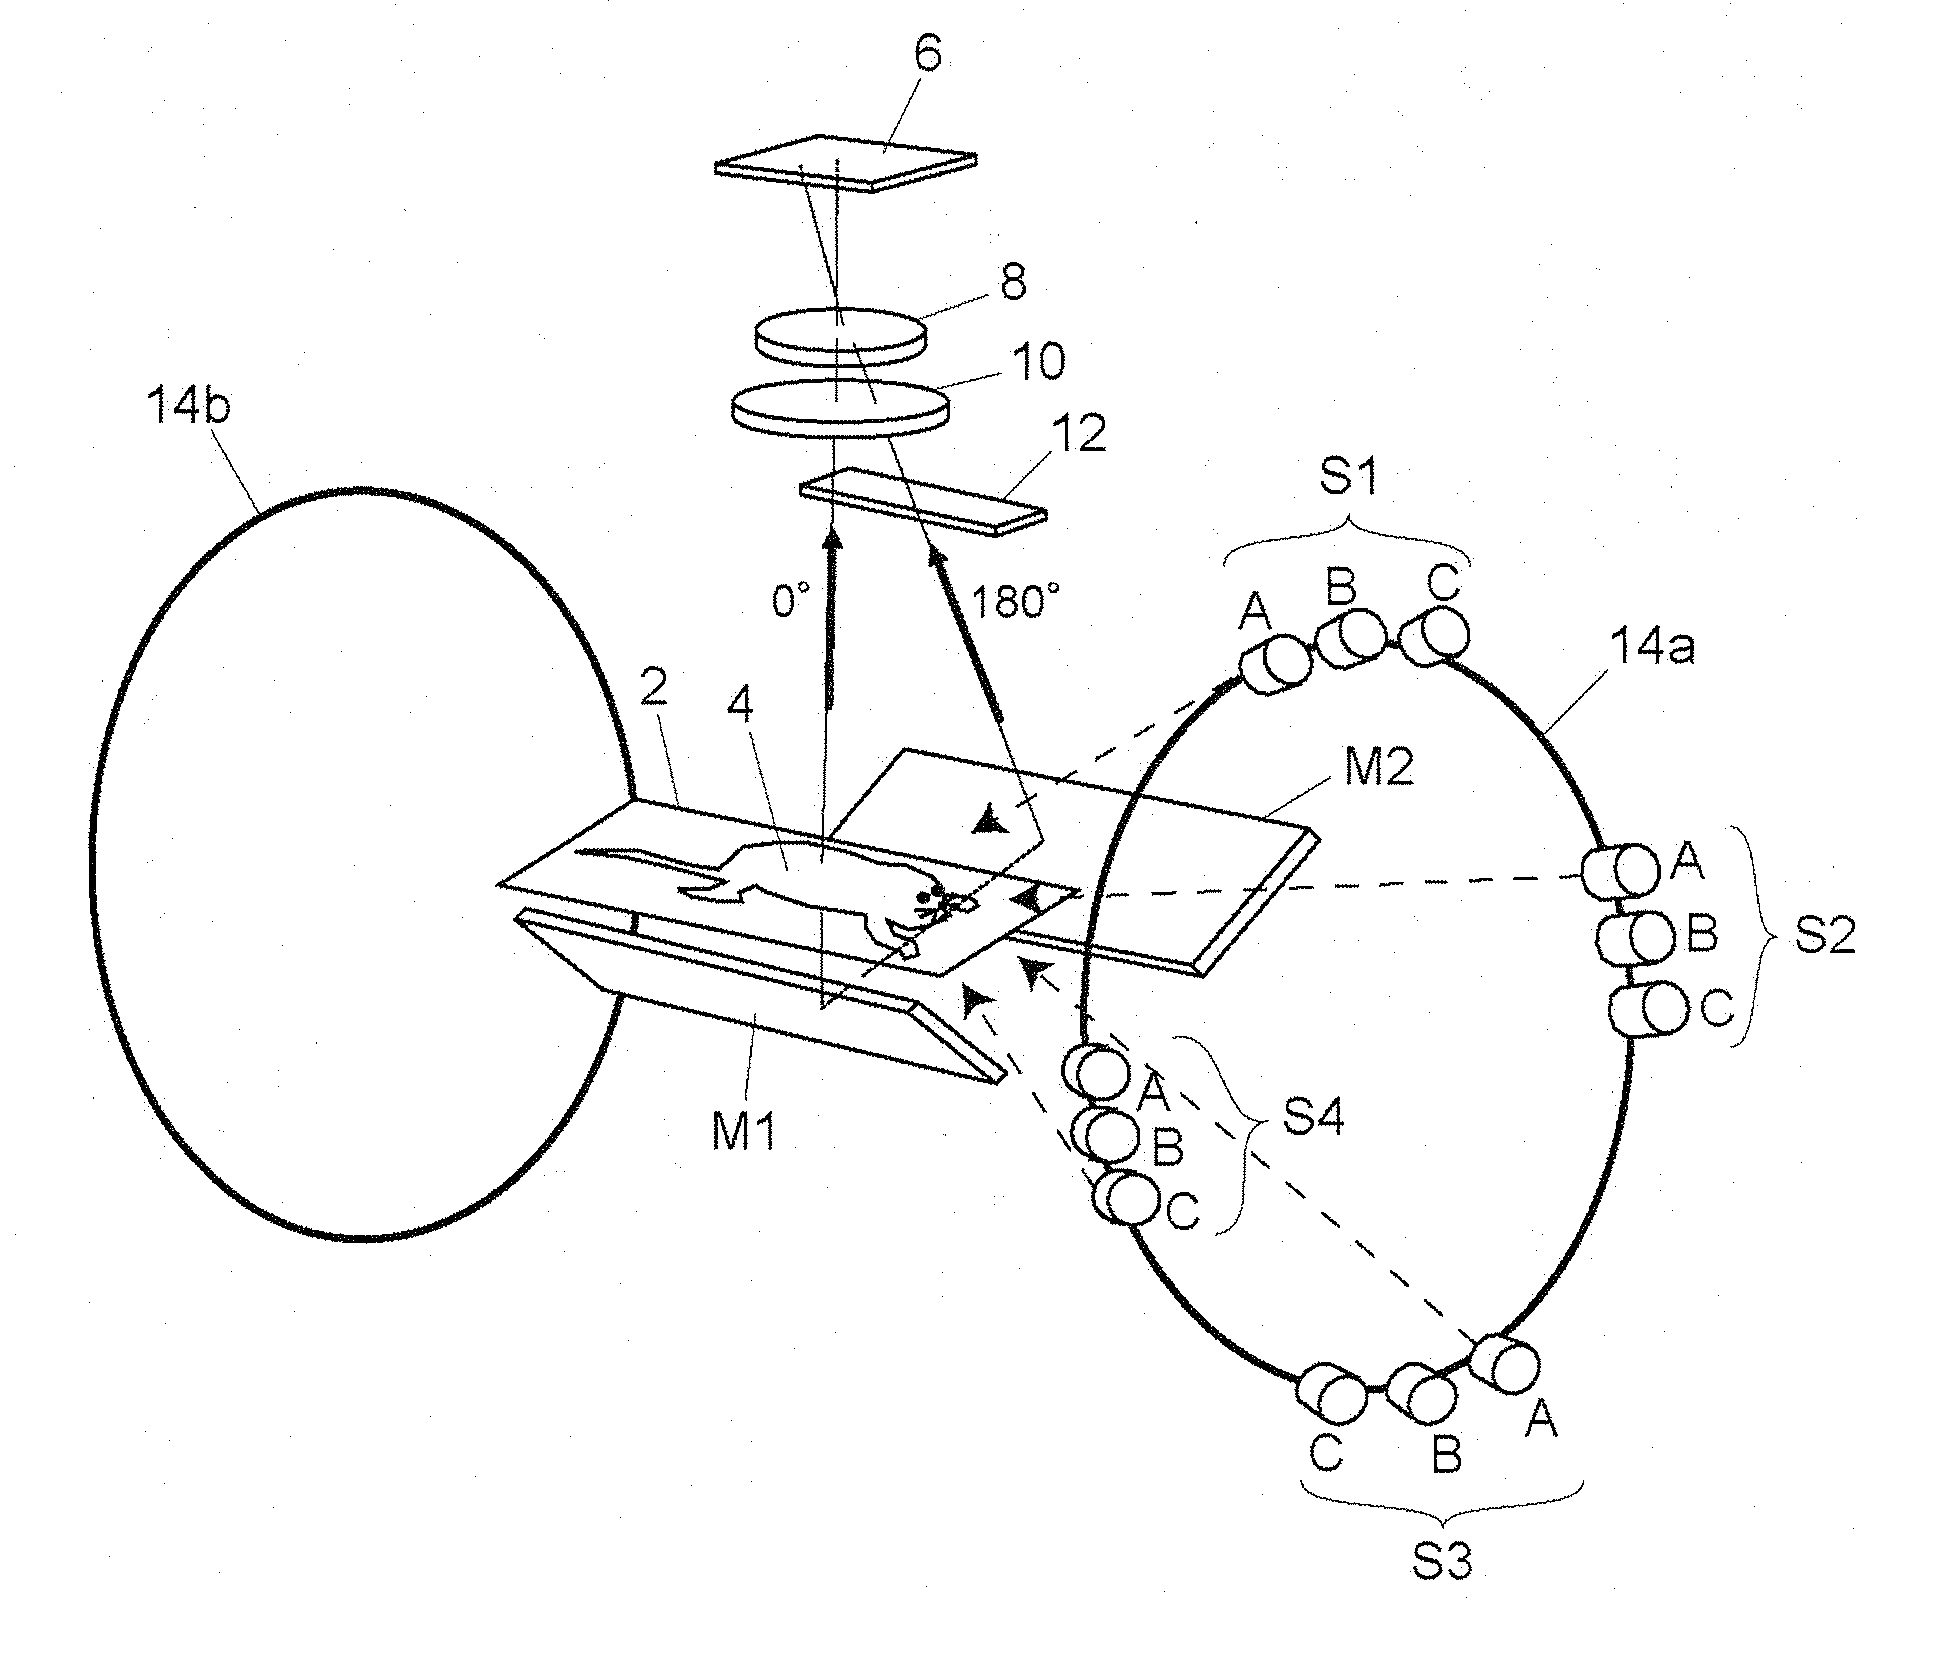 Biological image acquisition device